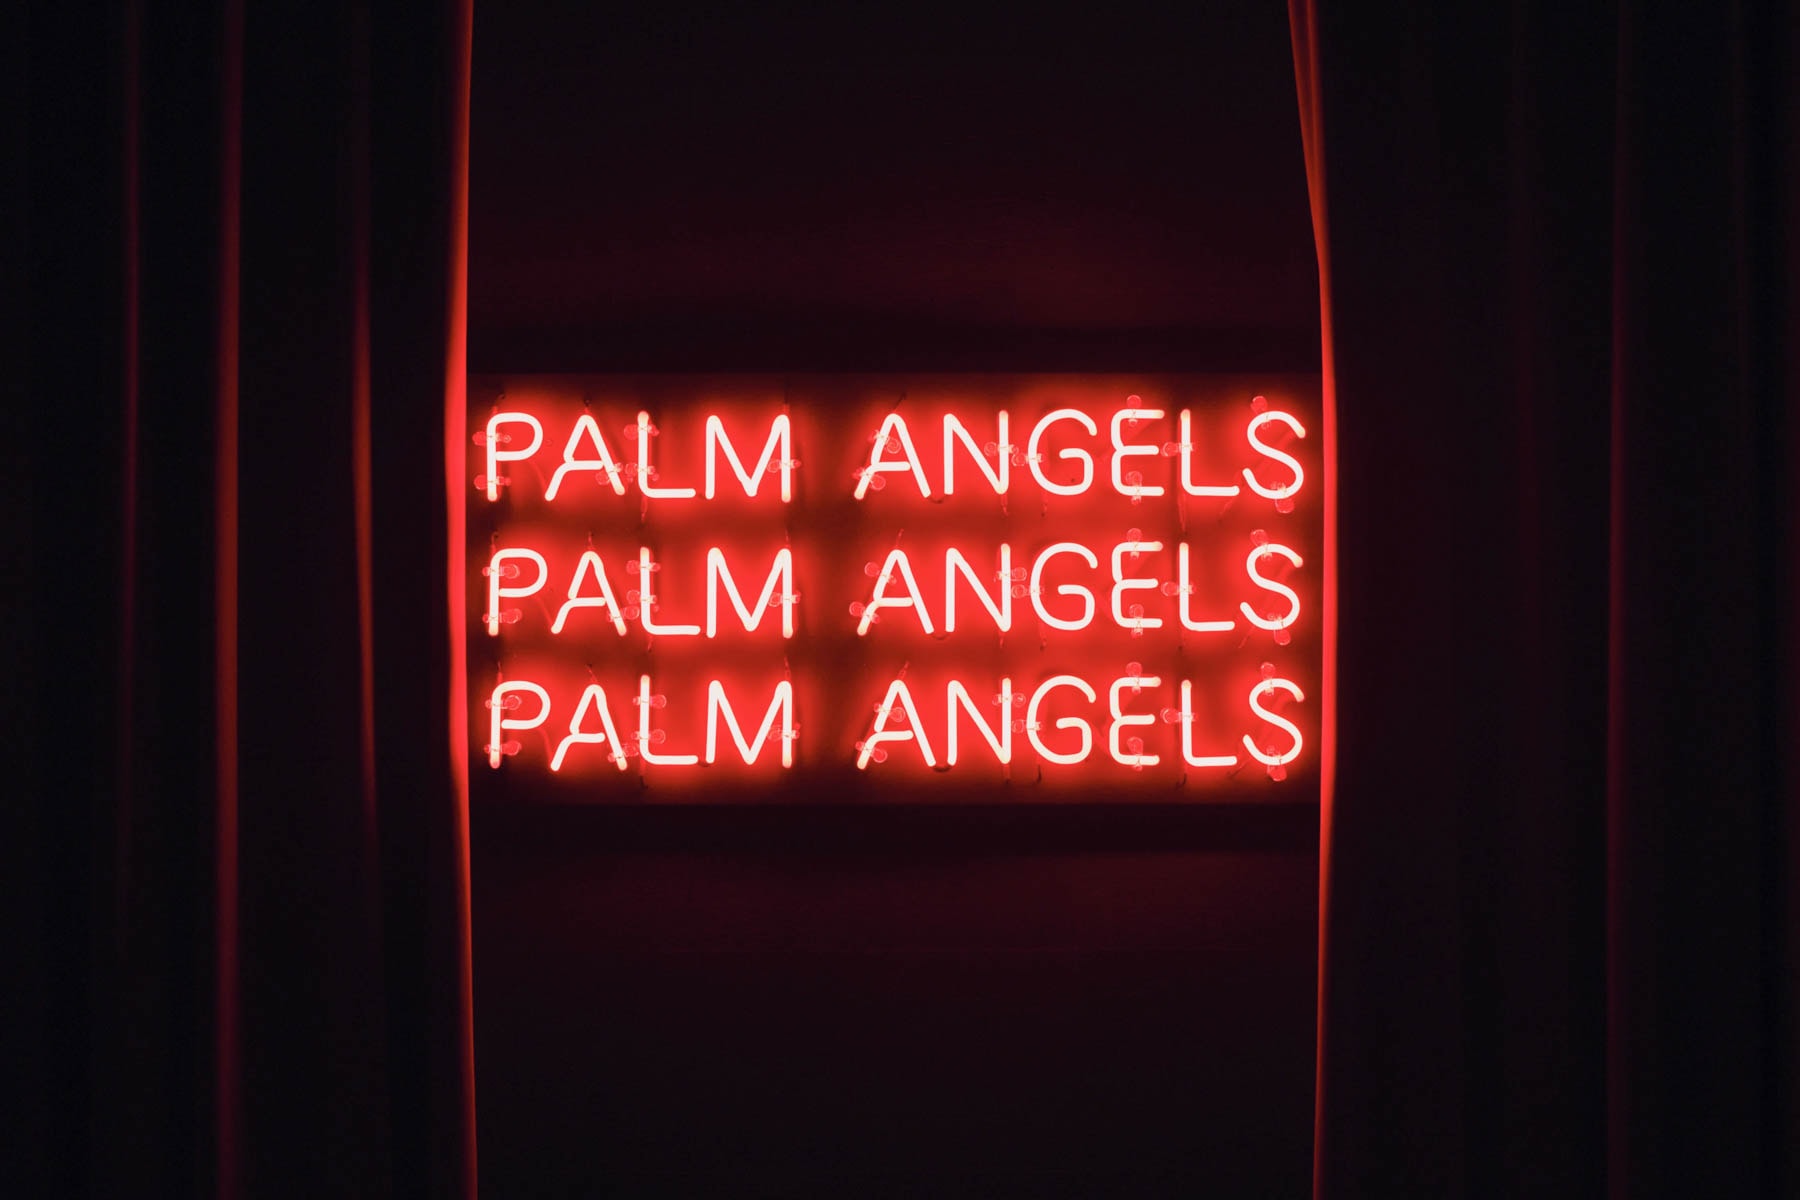 Palm Angels Lonely Hearts Club Pop Up Shop Tokyo Japan 2017 July